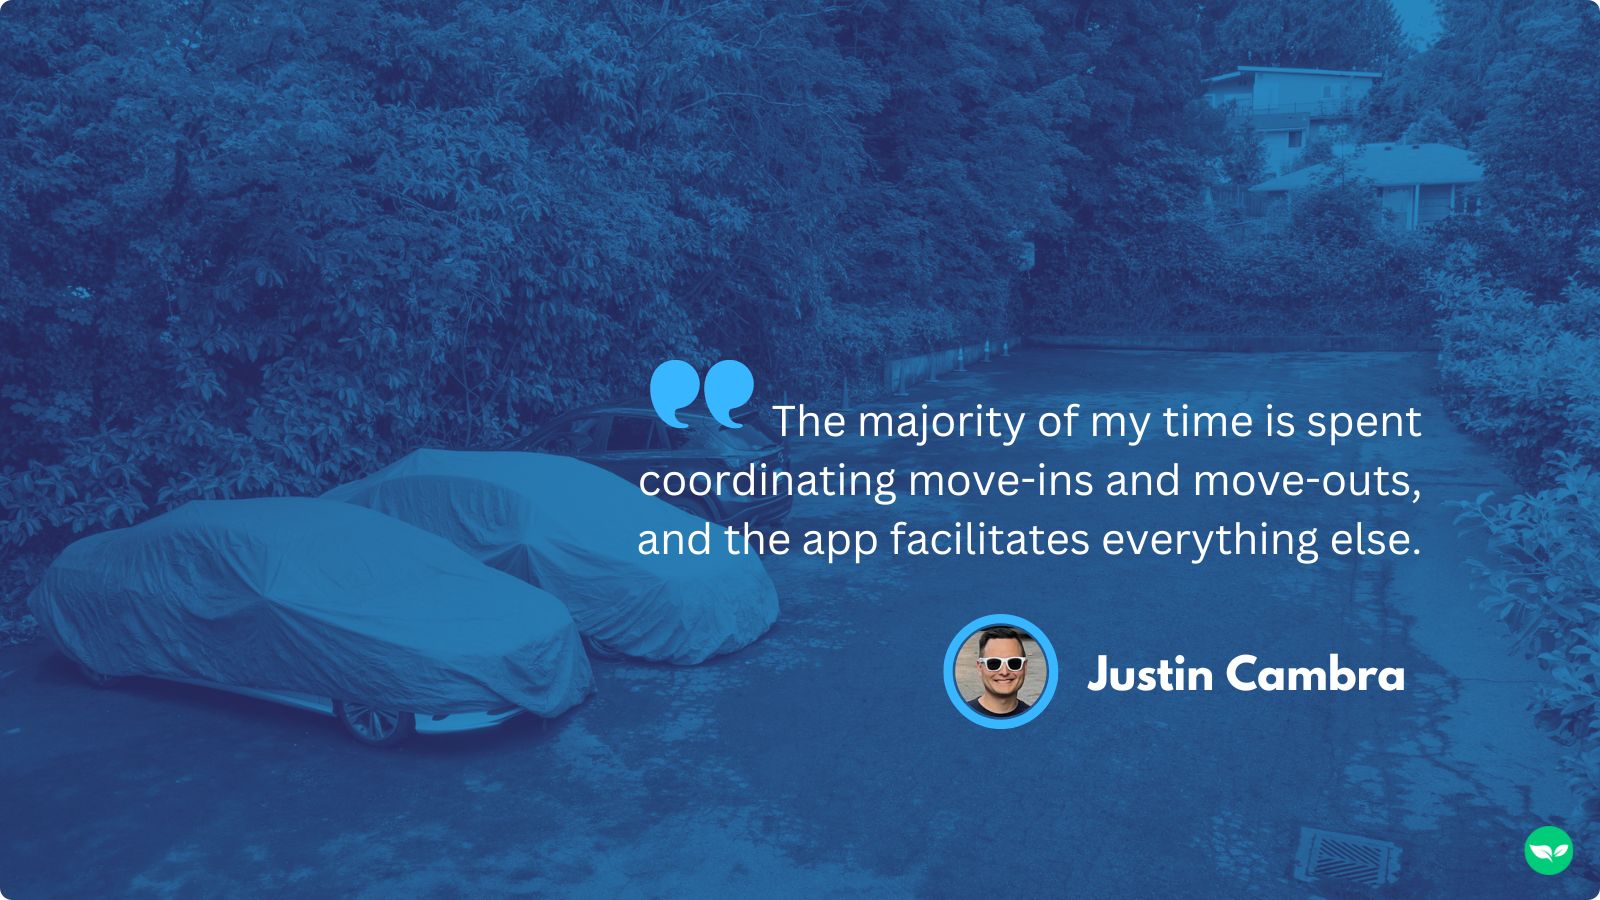 A quote from Justin, "The majority of my time is spent coordinating move-ins and move-outs, and the app facilitates everything else."